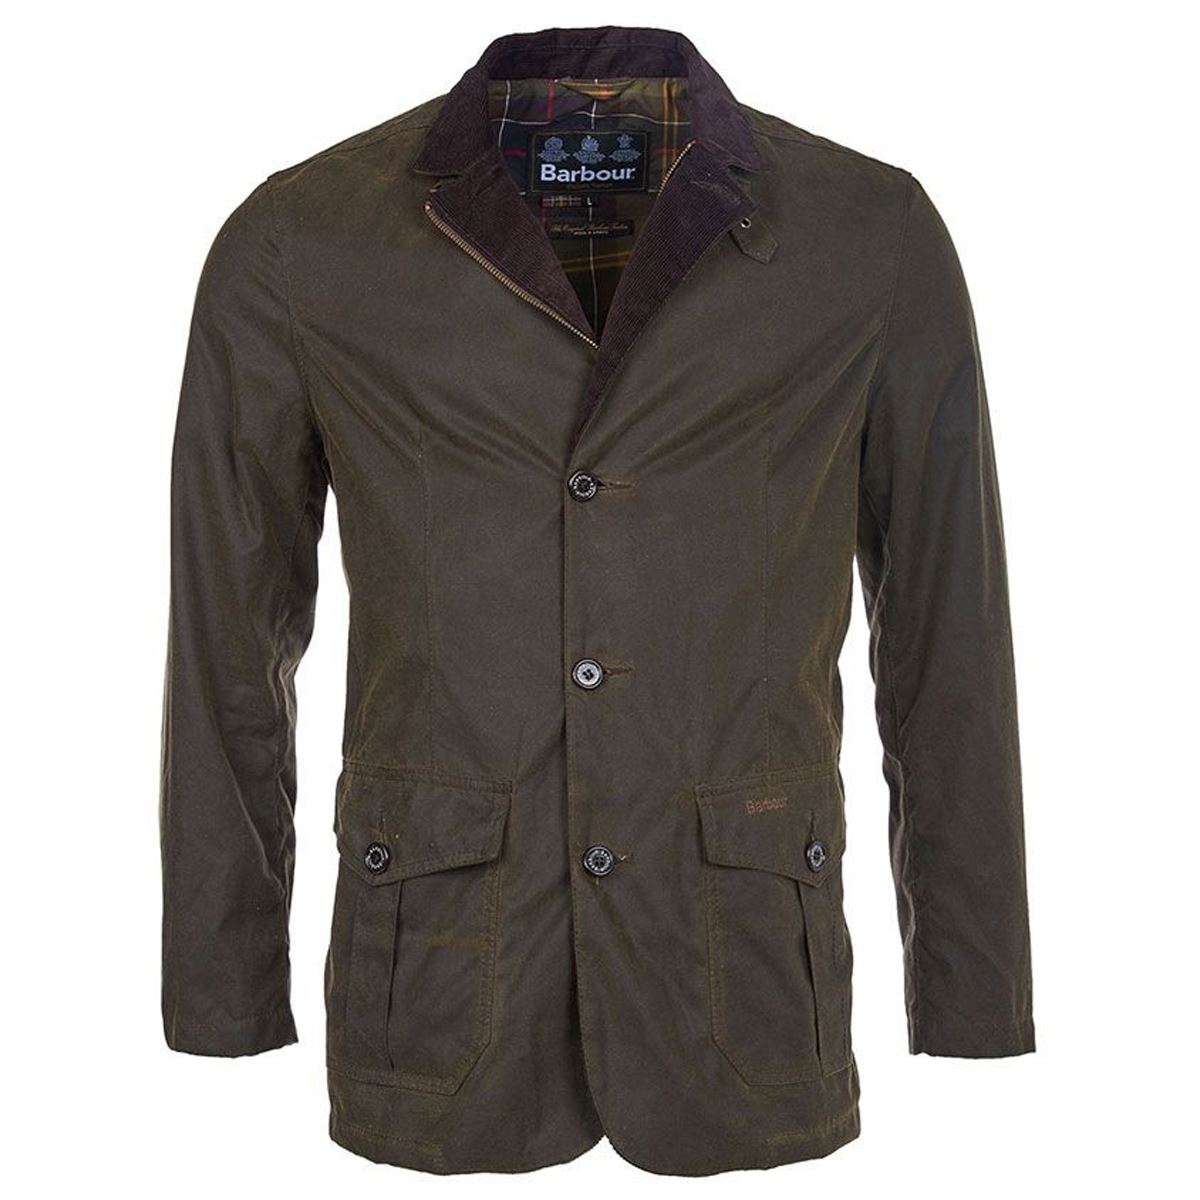 What is the objective of the barbour lutz wax jacket?